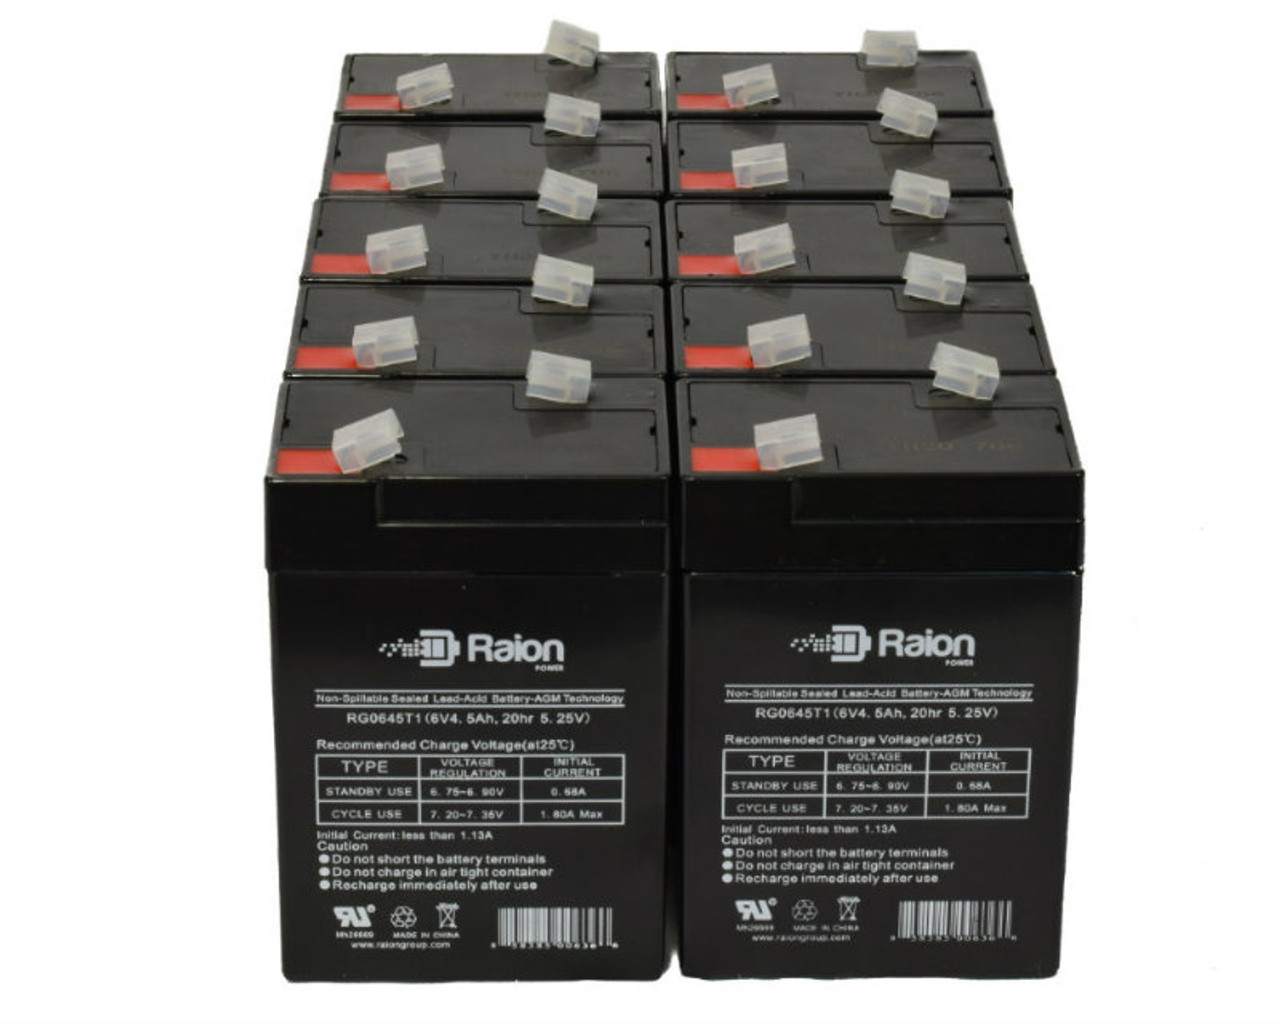 Raion Power 6V 4.5Ah Replacement Emergency Light Battery for Trio TL930085 - 10 Pack